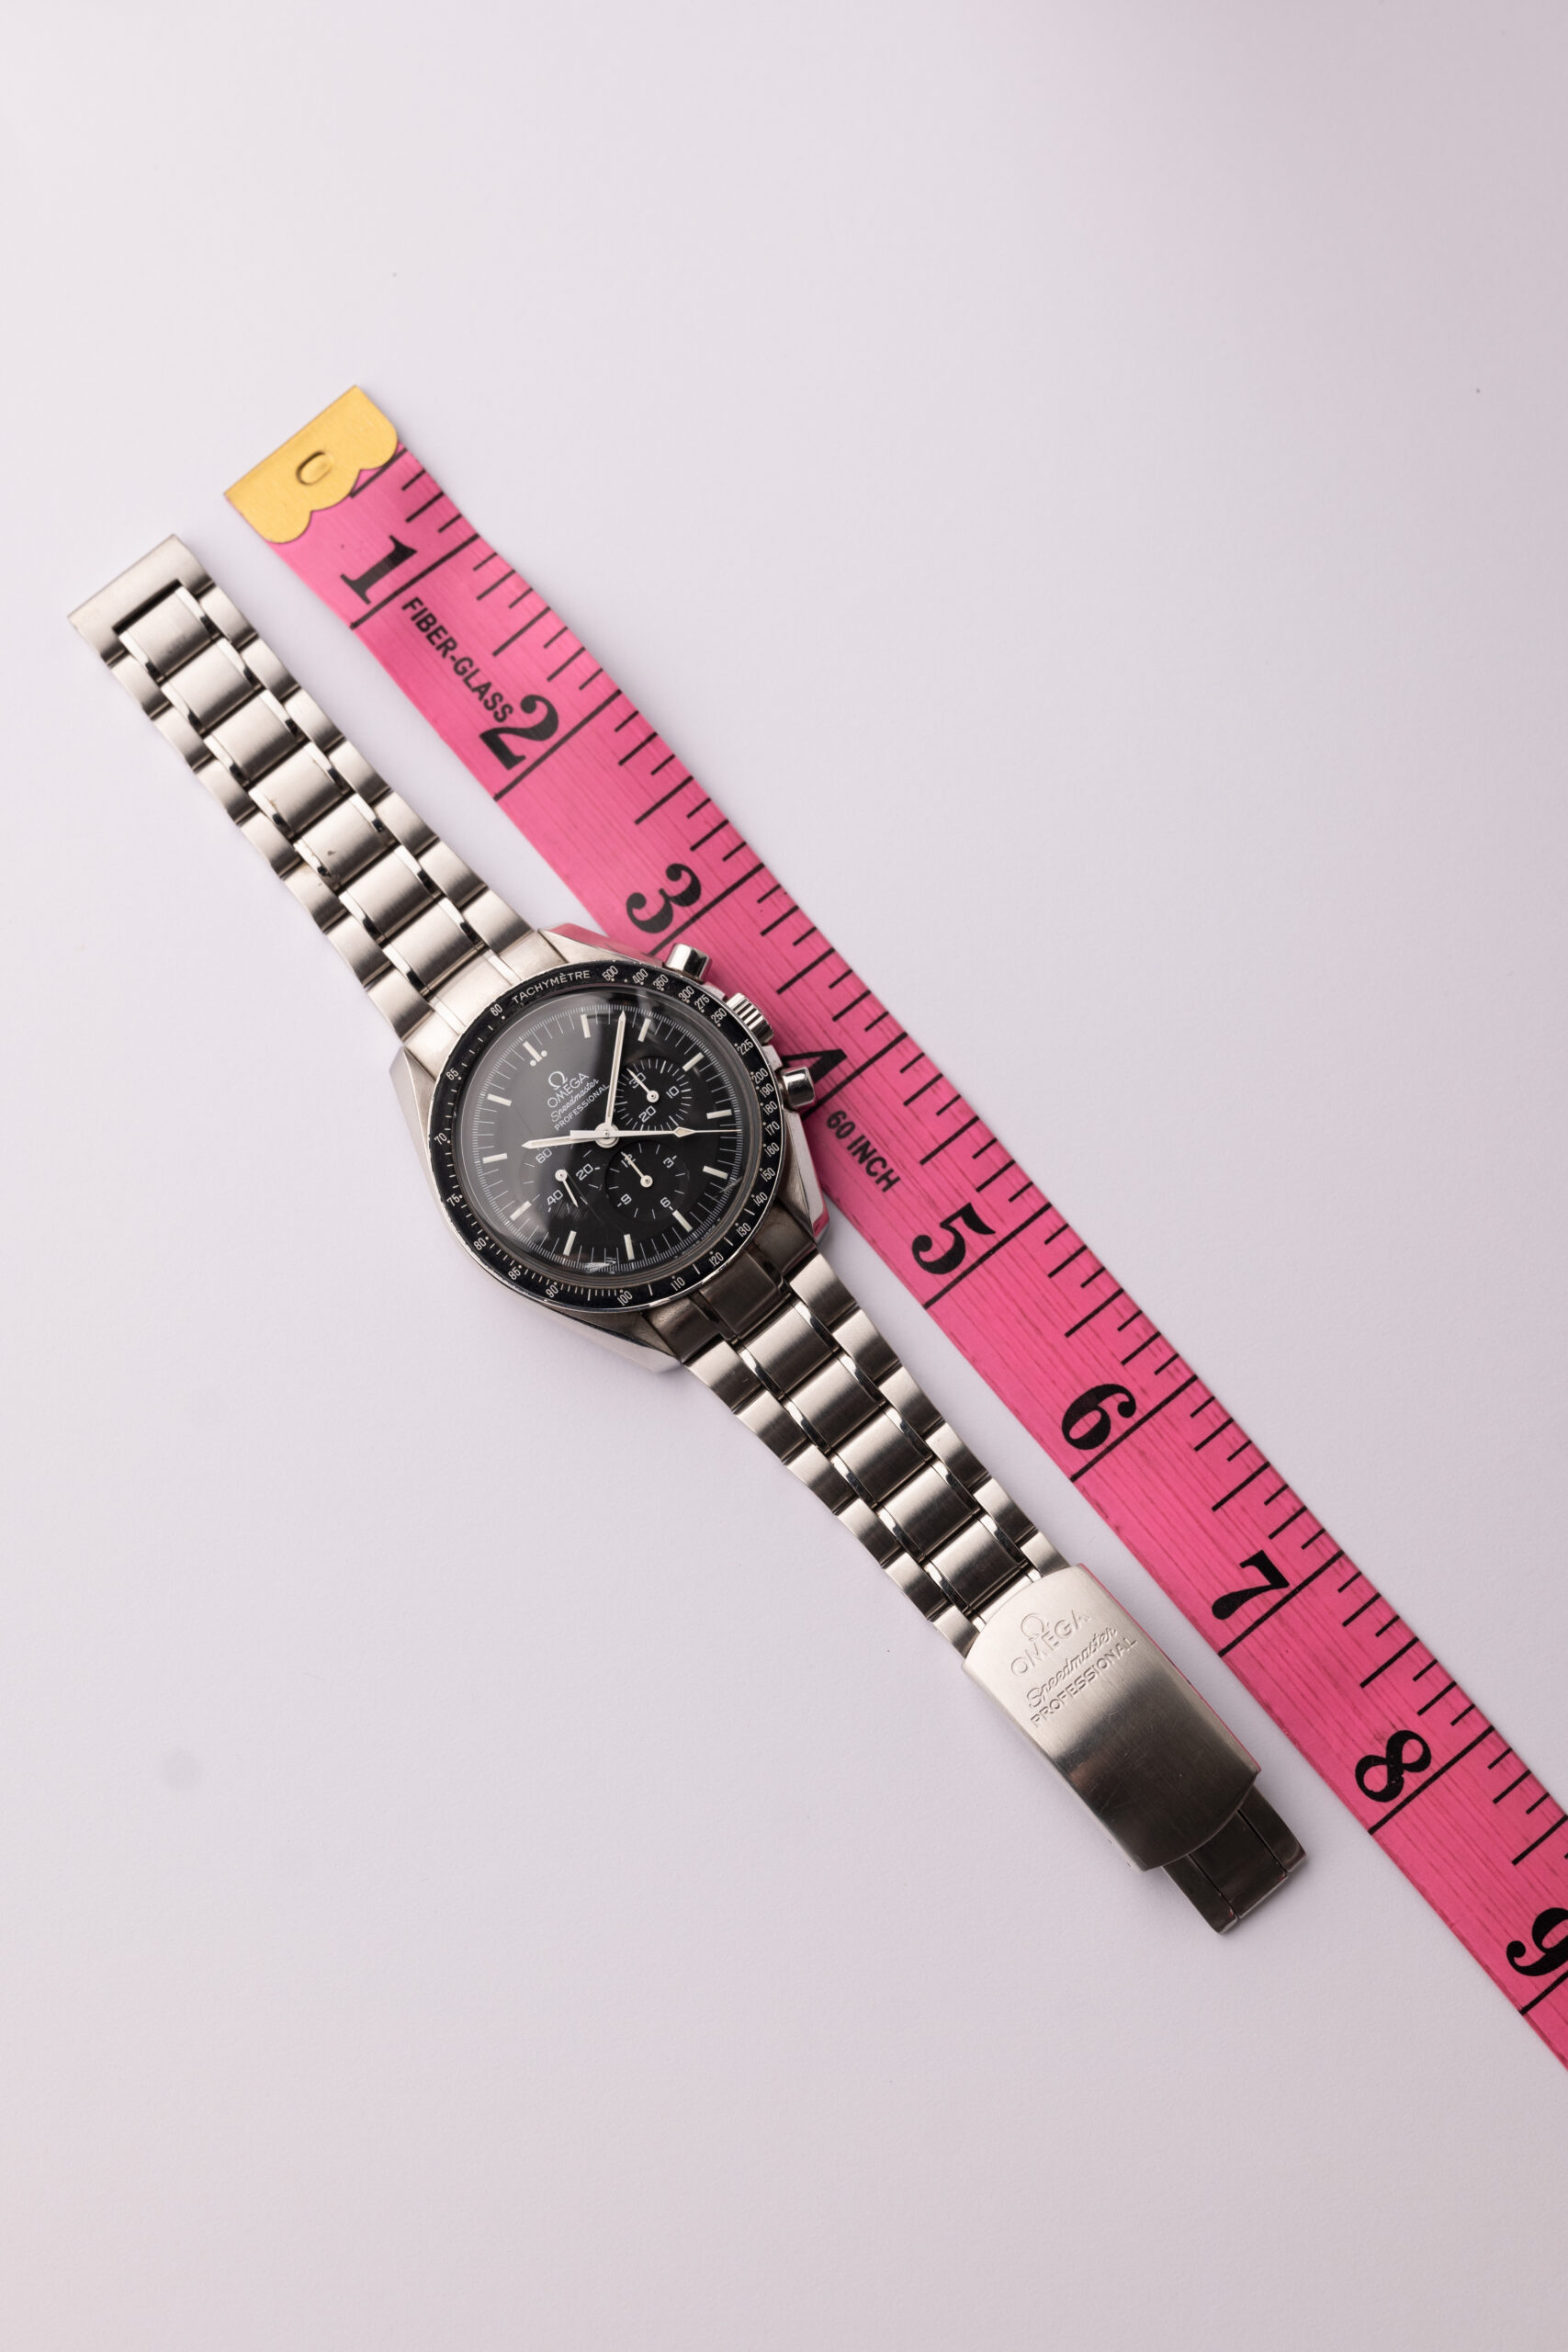 In The Metal: All Three OMEGA Snoopy Speedmaster Watches | Swisswatches  Magazine